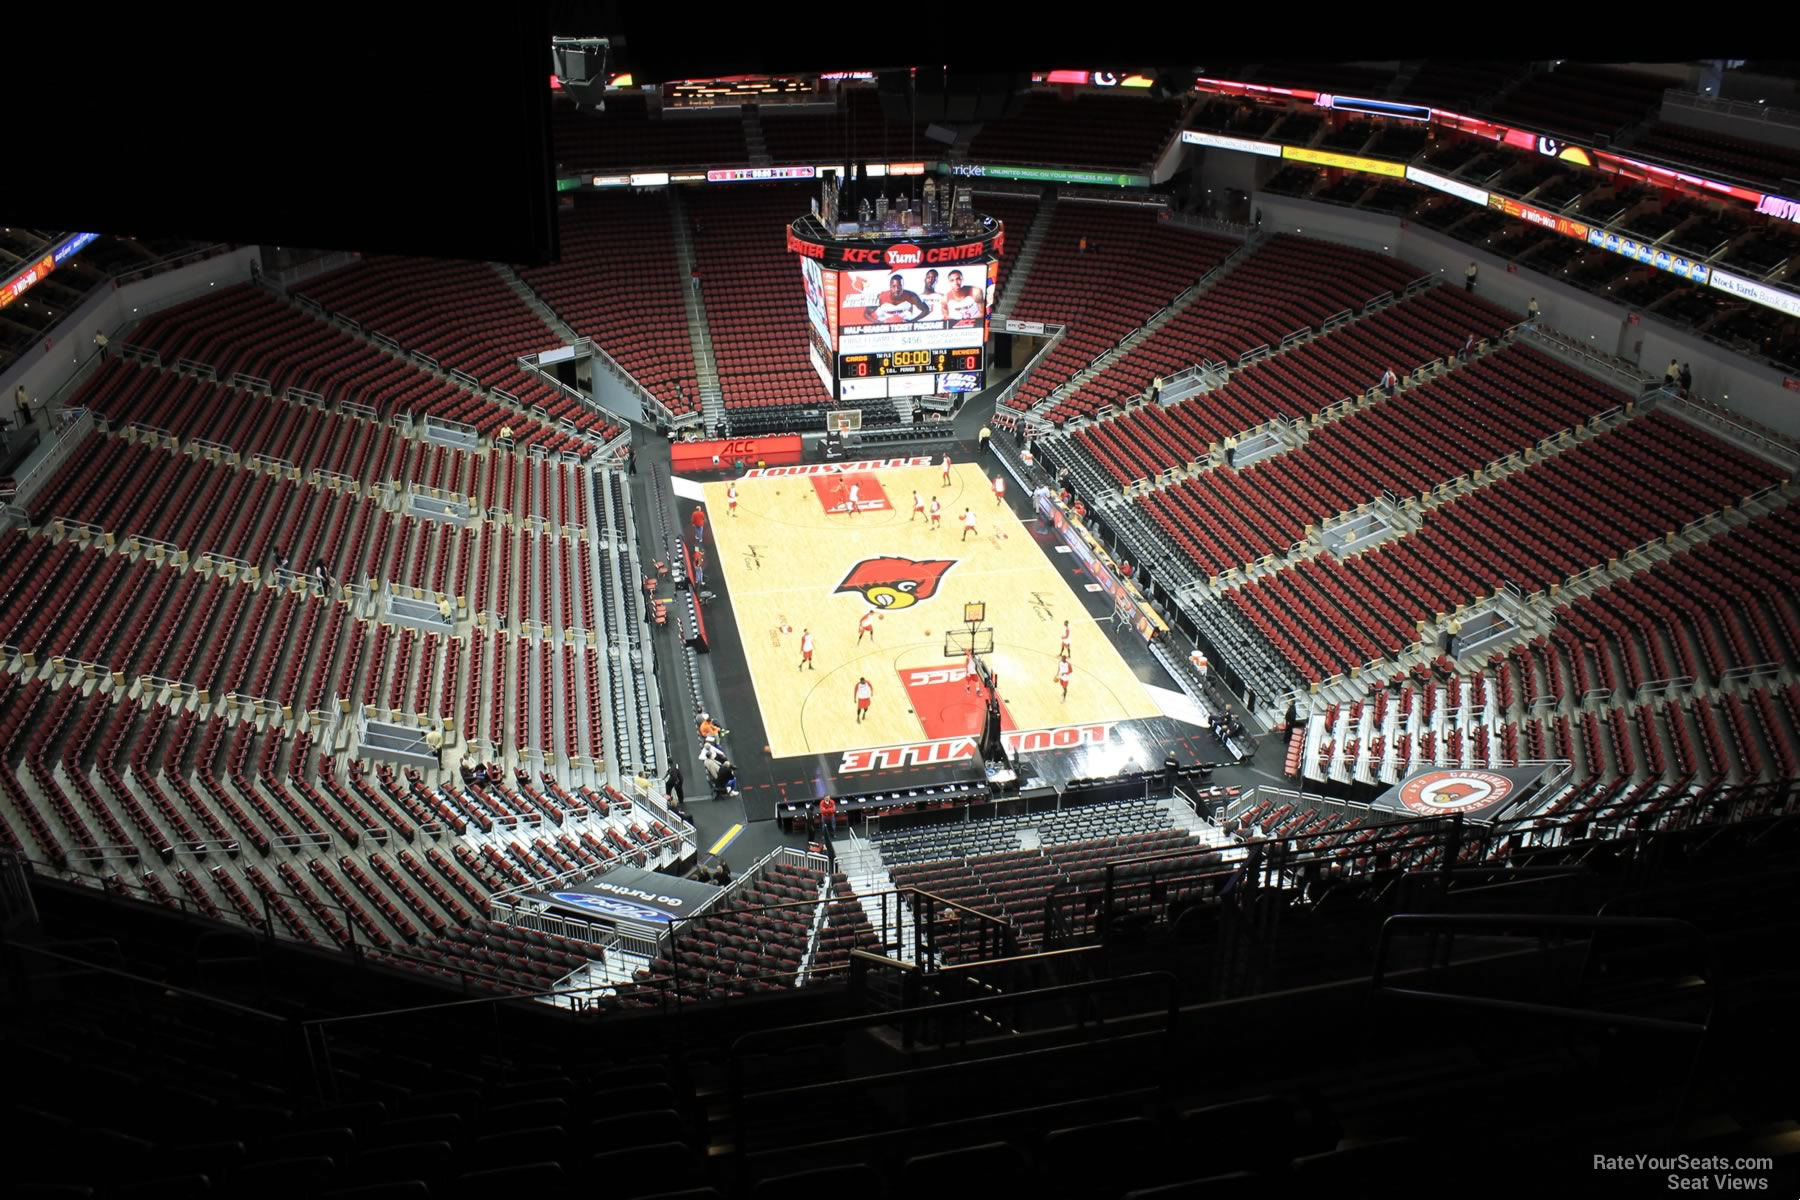 section 302, row r seat view  for basketball - kfc yum! center